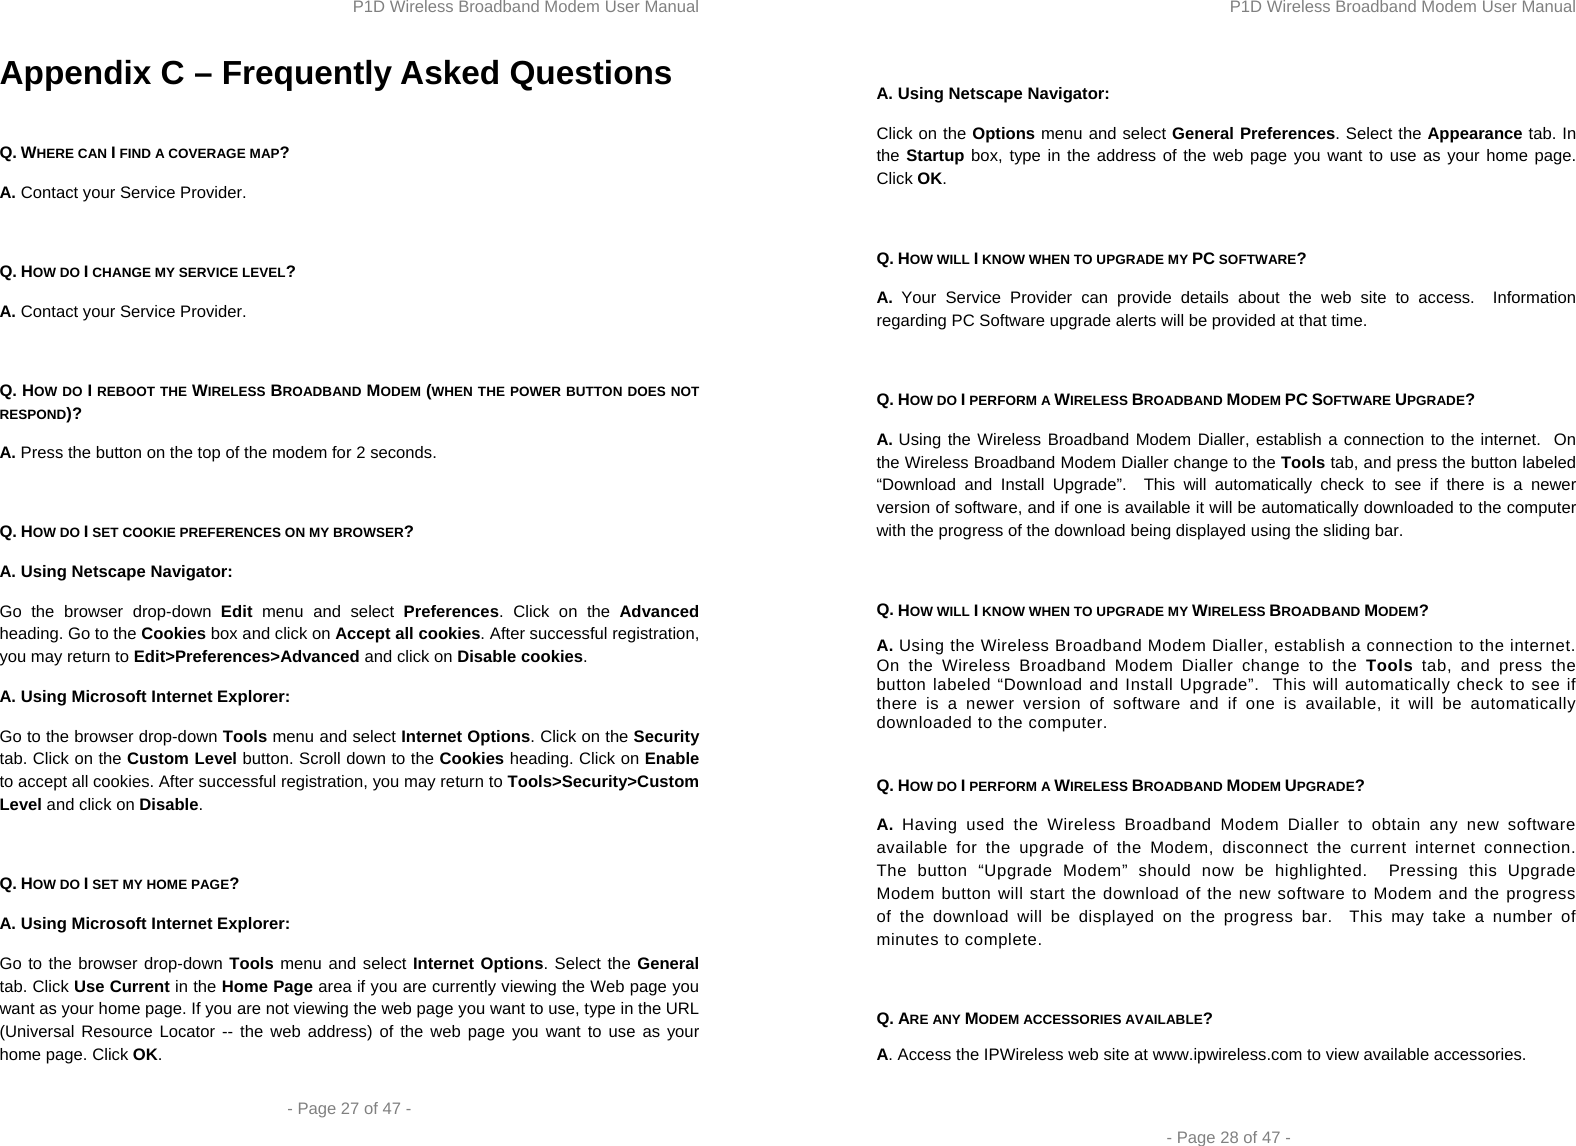 P1D Wireless Broadband Modem User Manual  - Page 27 of 47 -  Appendix C – Frequently Asked Questions  Q. WHERE CAN I FIND A COVERAGE MAP? A. Contact your Service Provider.  Q. HOW DO I CHANGE MY SERVICE LEVEL? A. Contact your Service Provider.  Q. HOW DO I REBOOT THE WIRELESS BROADBAND MODEM (WHEN THE POWER BUTTON DOES NOT RESPOND)? A. Press the button on the top of the modem for 2 seconds.  Q. HOW DO I SET COOKIE PREFERENCES ON MY BROWSER? A. Using Netscape Navigator: Go the browser drop-down Edit menu and select Preferences. Click on the Advanced heading. Go to the Cookies box and click on Accept all cookies. After successful registration, you may return to Edit&gt;Preferences&gt;Advanced and click on Disable cookies. A. Using Microsoft Internet Explorer: Go to the browser drop-down Tools menu and select Internet Options. Click on the Security tab. Click on the Custom Level button. Scroll down to the Cookies heading. Click on Enable to accept all cookies. After successful registration, you may return to Tools&gt;Security&gt;Custom Level and click on Disable.  Q. HOW DO I SET MY HOME PAGE? A. Using Microsoft Internet Explorer: Go to the browser drop-down Tools menu and select Internet Options. Select the General tab. Click Use Current in the Home Page area if you are currently viewing the Web page you want as your home page. If you are not viewing the web page you want to use, type in the URL (Universal Resource Locator -- the web address) of the web page you want to use as your home page. Click OK. P1D Wireless Broadband Modem User Manual  - Page 28 of 47 -  A. Using Netscape Navigator: Click on the Options menu and select General Preferences. Select the Appearance tab. In the Startup box, type in the address of the web page you want to use as your home page. Click OK.  Q. HOW WILL I KNOW WHEN TO UPGRADE MY PC SOFTWARE? A. Your Service Provider can provide details about the web site to access.  Information regarding PC Software upgrade alerts will be provided at that time.  Q. HOW DO I PERFORM A WIRELESS BROADBAND MODEM PC SOFTWARE UPGRADE? A. Using the Wireless Broadband Modem Dialler, establish a connection to the internet.  On the Wireless Broadband Modem Dialler change to the Tools tab, and press the button labeled “Download and Install Upgrade”.  This will automatically check to see if there is a newer version of software, and if one is available it will be automatically downloaded to the computer with the progress of the download being displayed using the sliding bar.  Q. HOW WILL I KNOW WHEN TO UPGRADE MY WIRELESS BROADBAND MODEM? A. Using the Wireless Broadband Modem Dialler, establish a connection to the internet.  On the Wireless Broadband Modem Dialler change to the Tools tab, and press the button labeled “Download and Install Upgrade”.  This will automatically check to see if there is a newer version of software and if one is available, it will be automatically downloaded to the computer.  Q. HOW DO I PERFORM A WIRELESS BROADBAND MODEM UPGRADE? A. Having used the Wireless Broadband Modem Dialler to obtain any new software available for the upgrade of the Modem, disconnect the current internet connection.  The button “Upgrade Modem” should now be highlighted.  Pressing this Upgrade Modem button will start the download of the new software to Modem and the progress of the download will be displayed on the progress bar.  This may take a number of minutes to complete.  Q. ARE ANY MODEM ACCESSORIES AVAILABLE? A. Access the IPWireless web site at www.ipwireless.com to view available accessories.  